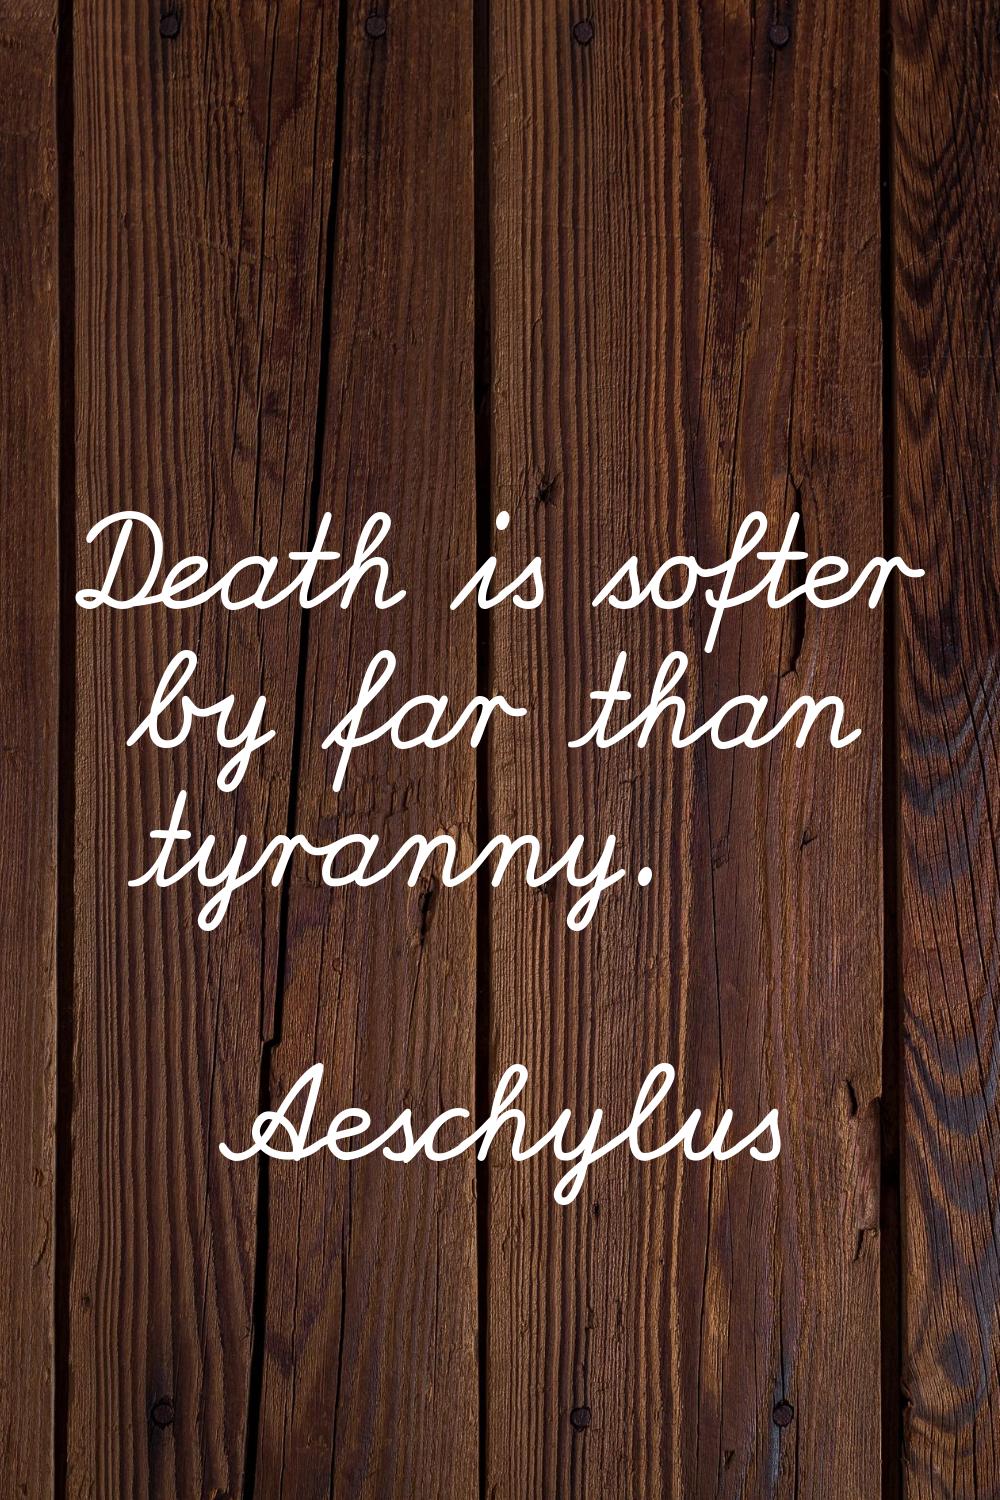 Death is softer by far than tyranny.